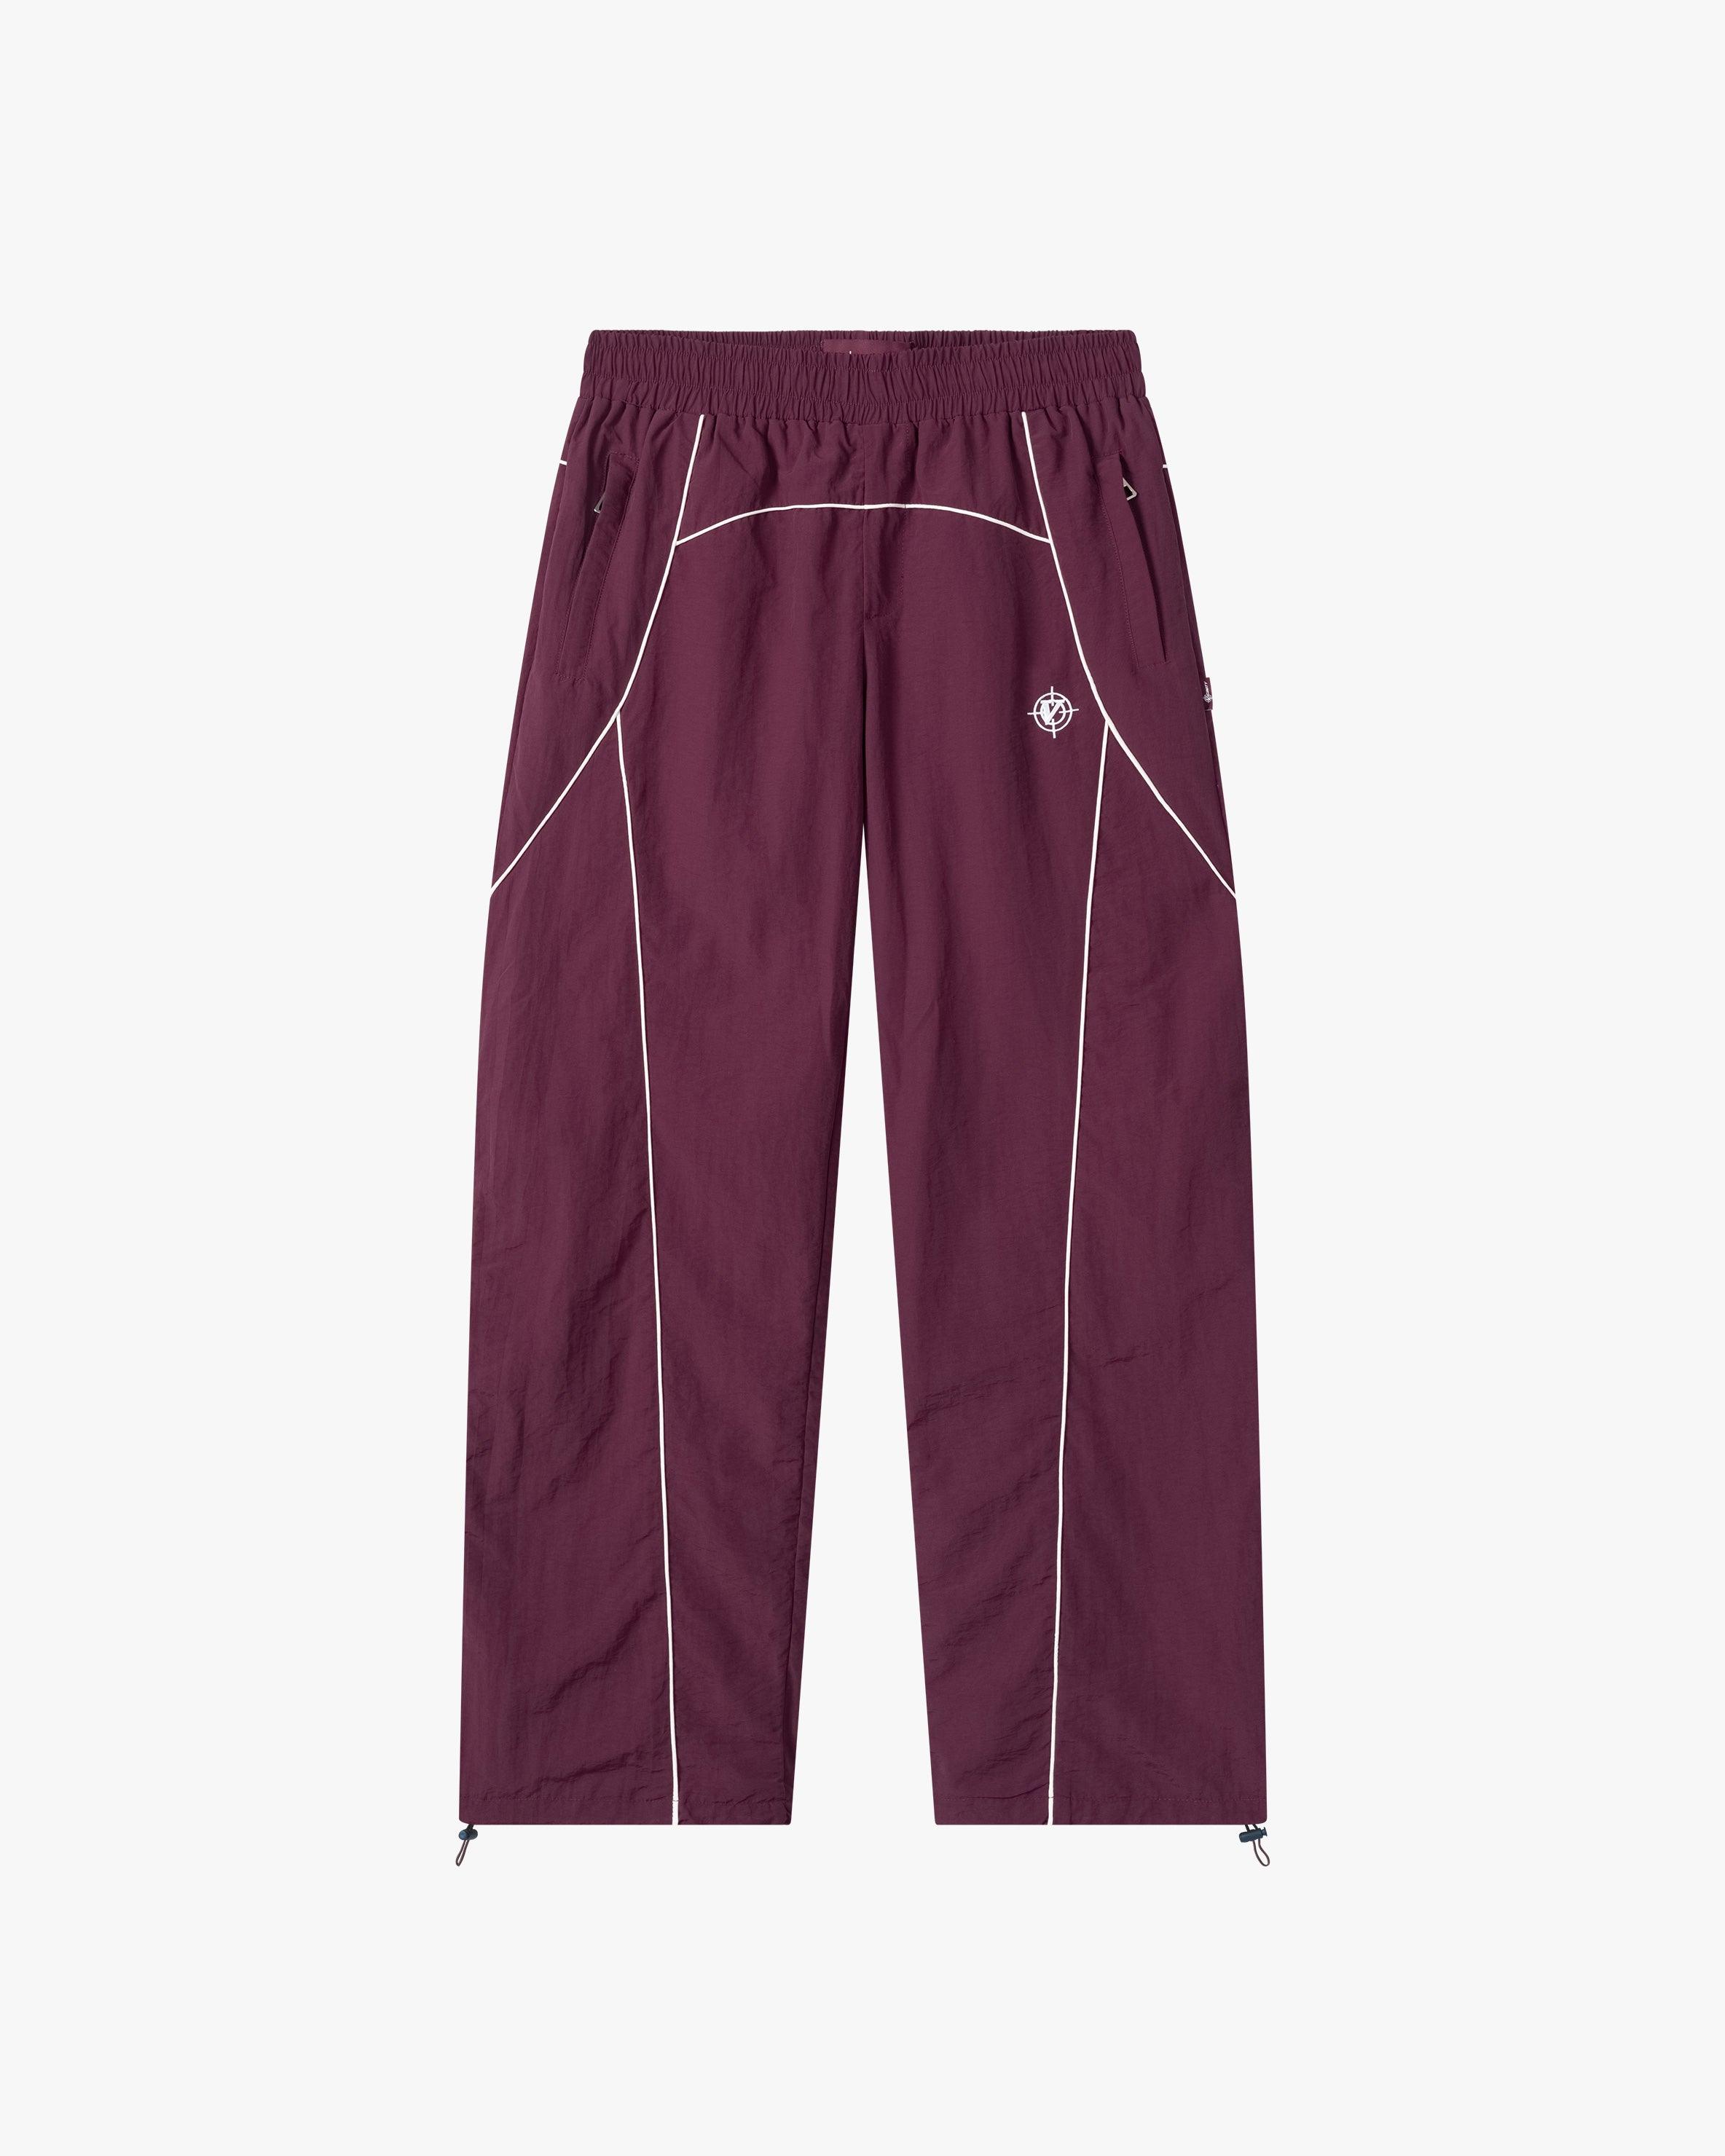 Hiskywin Burgundy Track Pants Size S - 50% off